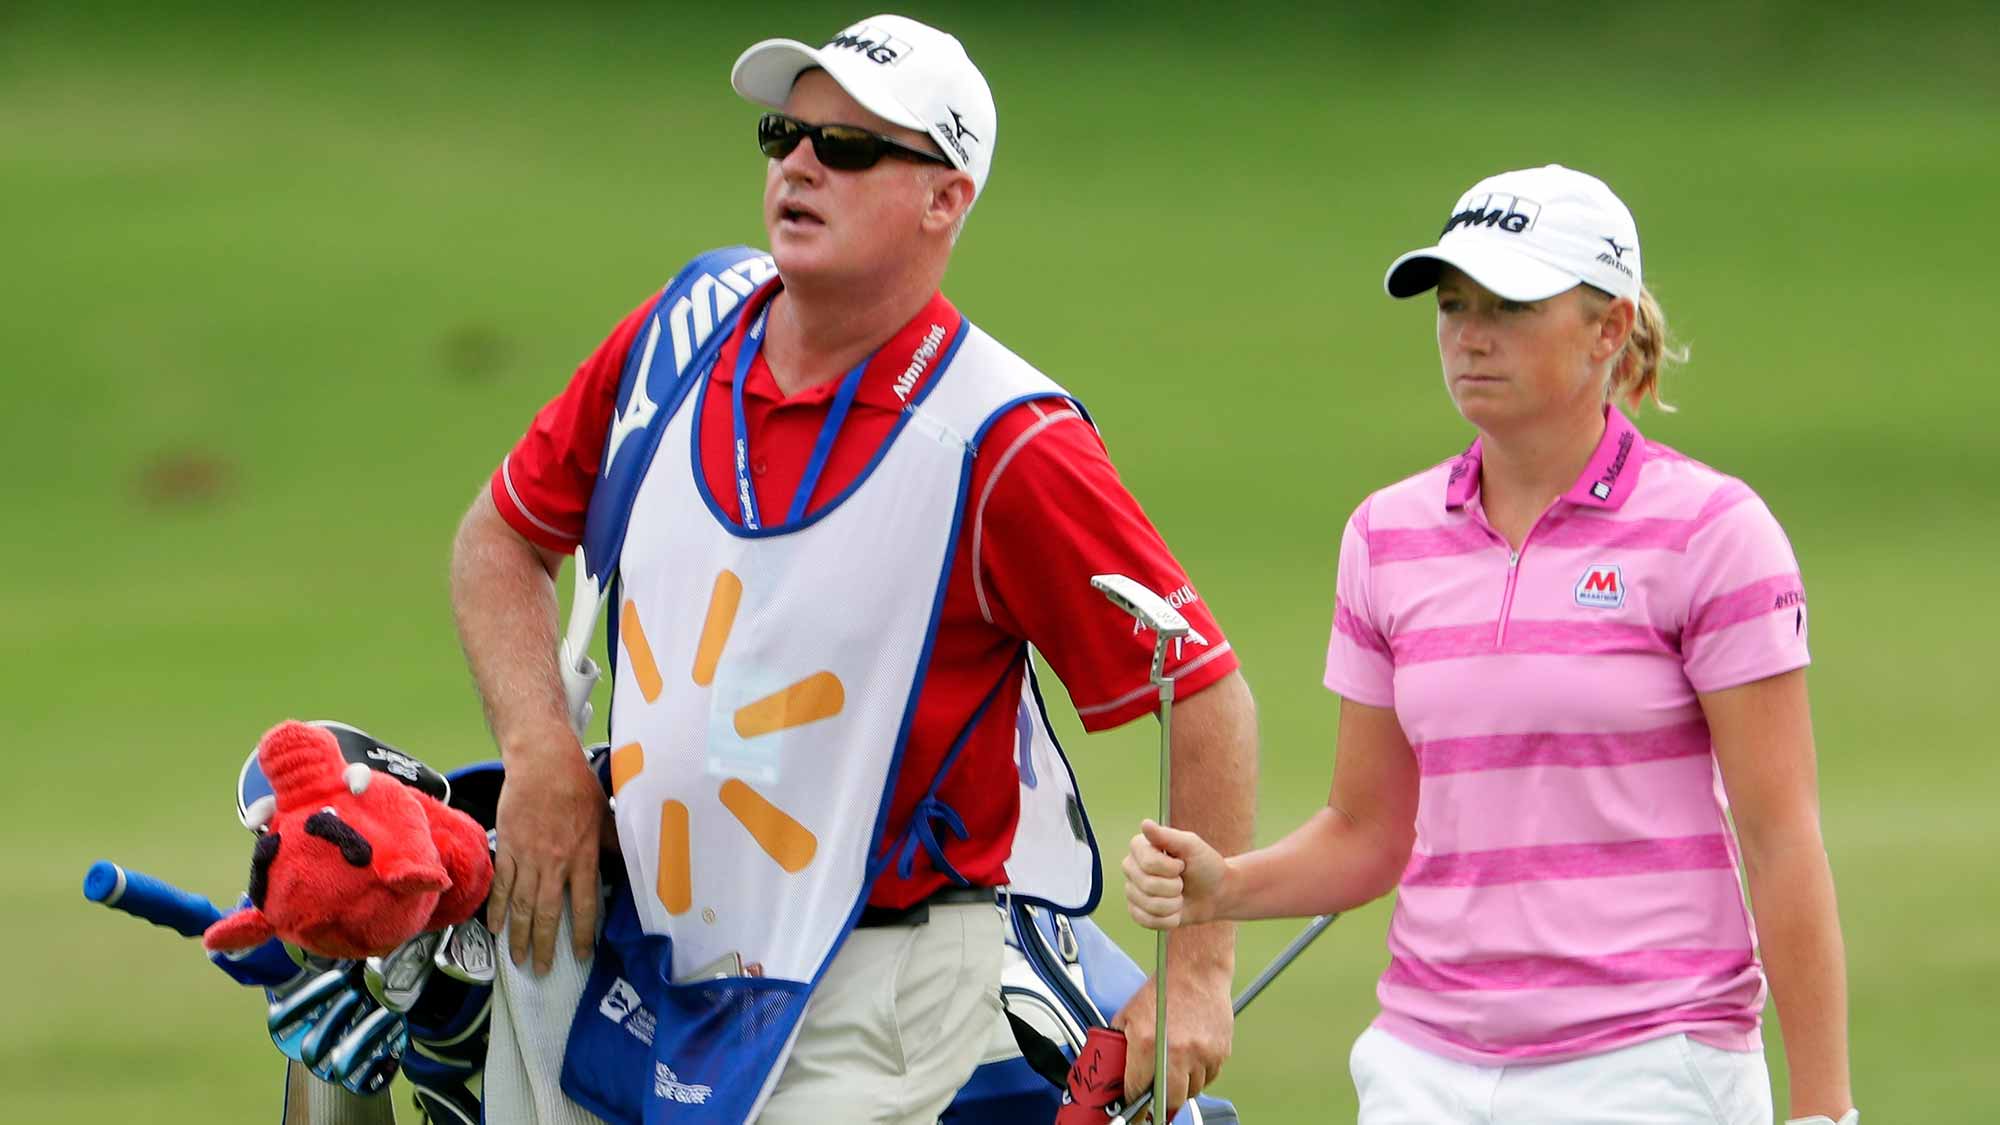 Stacy Lewis walks up the fairway alongside her caddie on the 10th hole during the first round of the Walmart NW Arkansas Championship Presented by P&G